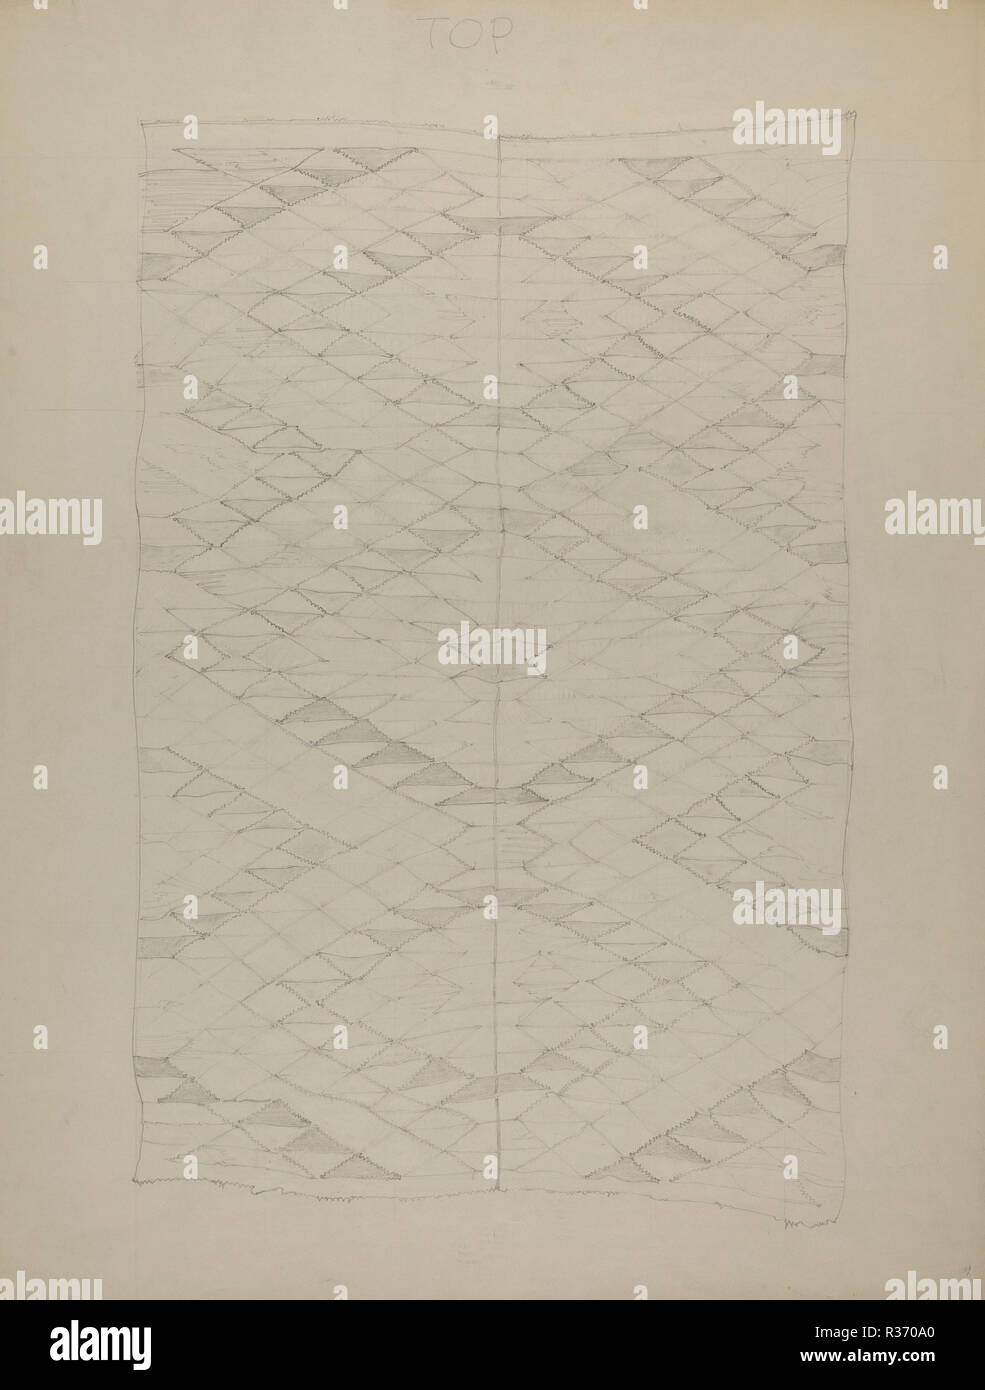 Textile. Dated: 1935/1942. Dimensions: overall: 66 x 51 cm (26 x 20 1/16 in.). Medium: graphite on paper. Museum: National Gallery of Art, Washington DC. Author: American 20th Century. Stock Photo